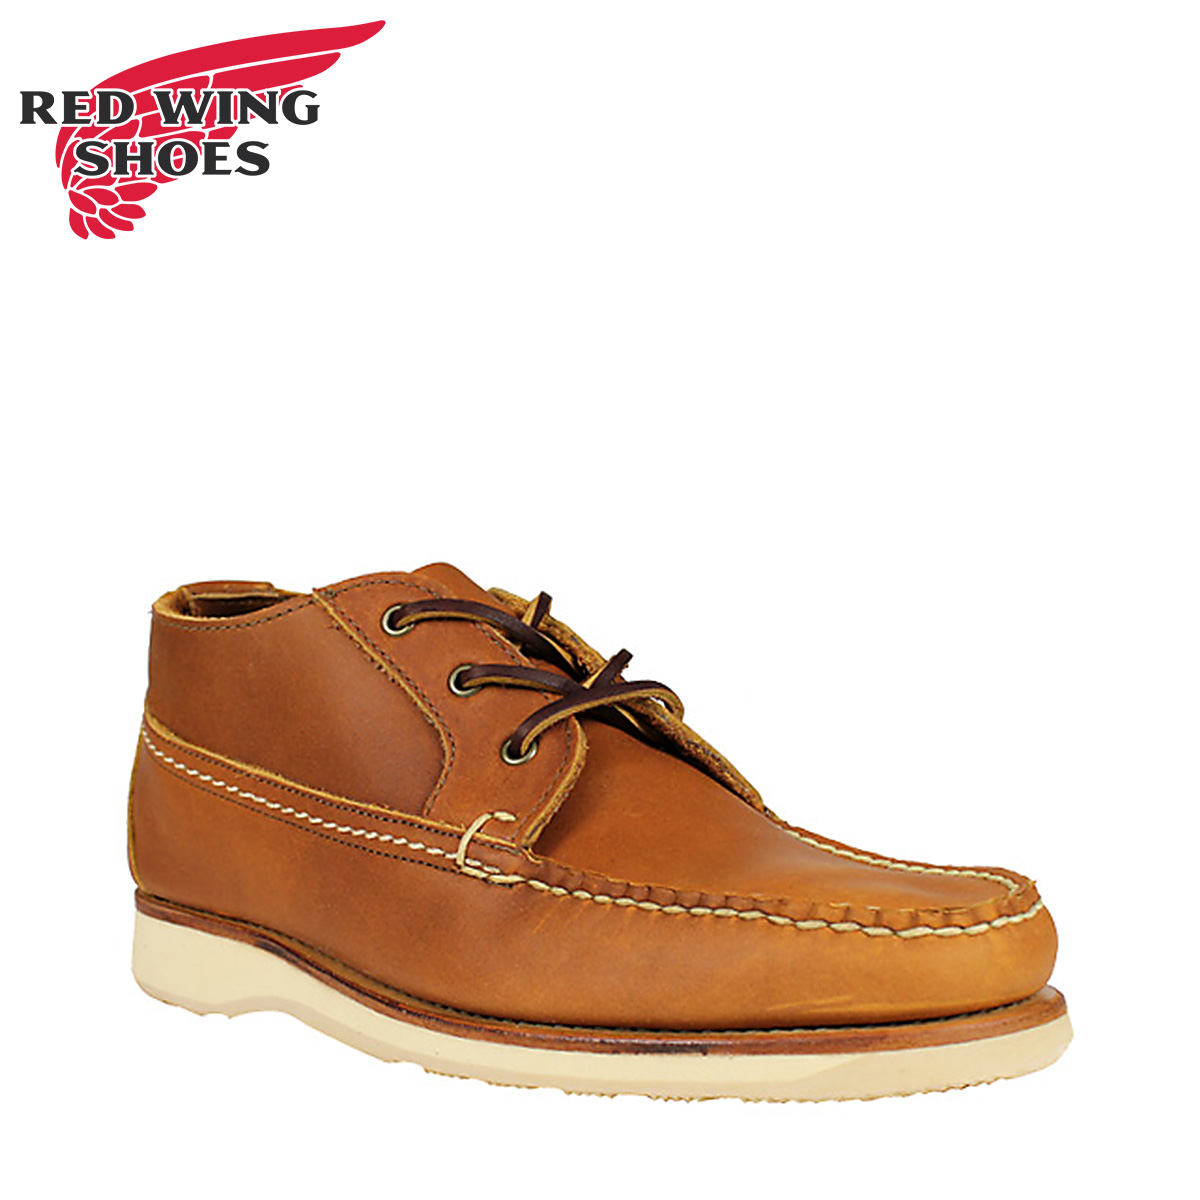 red wing boots usa made